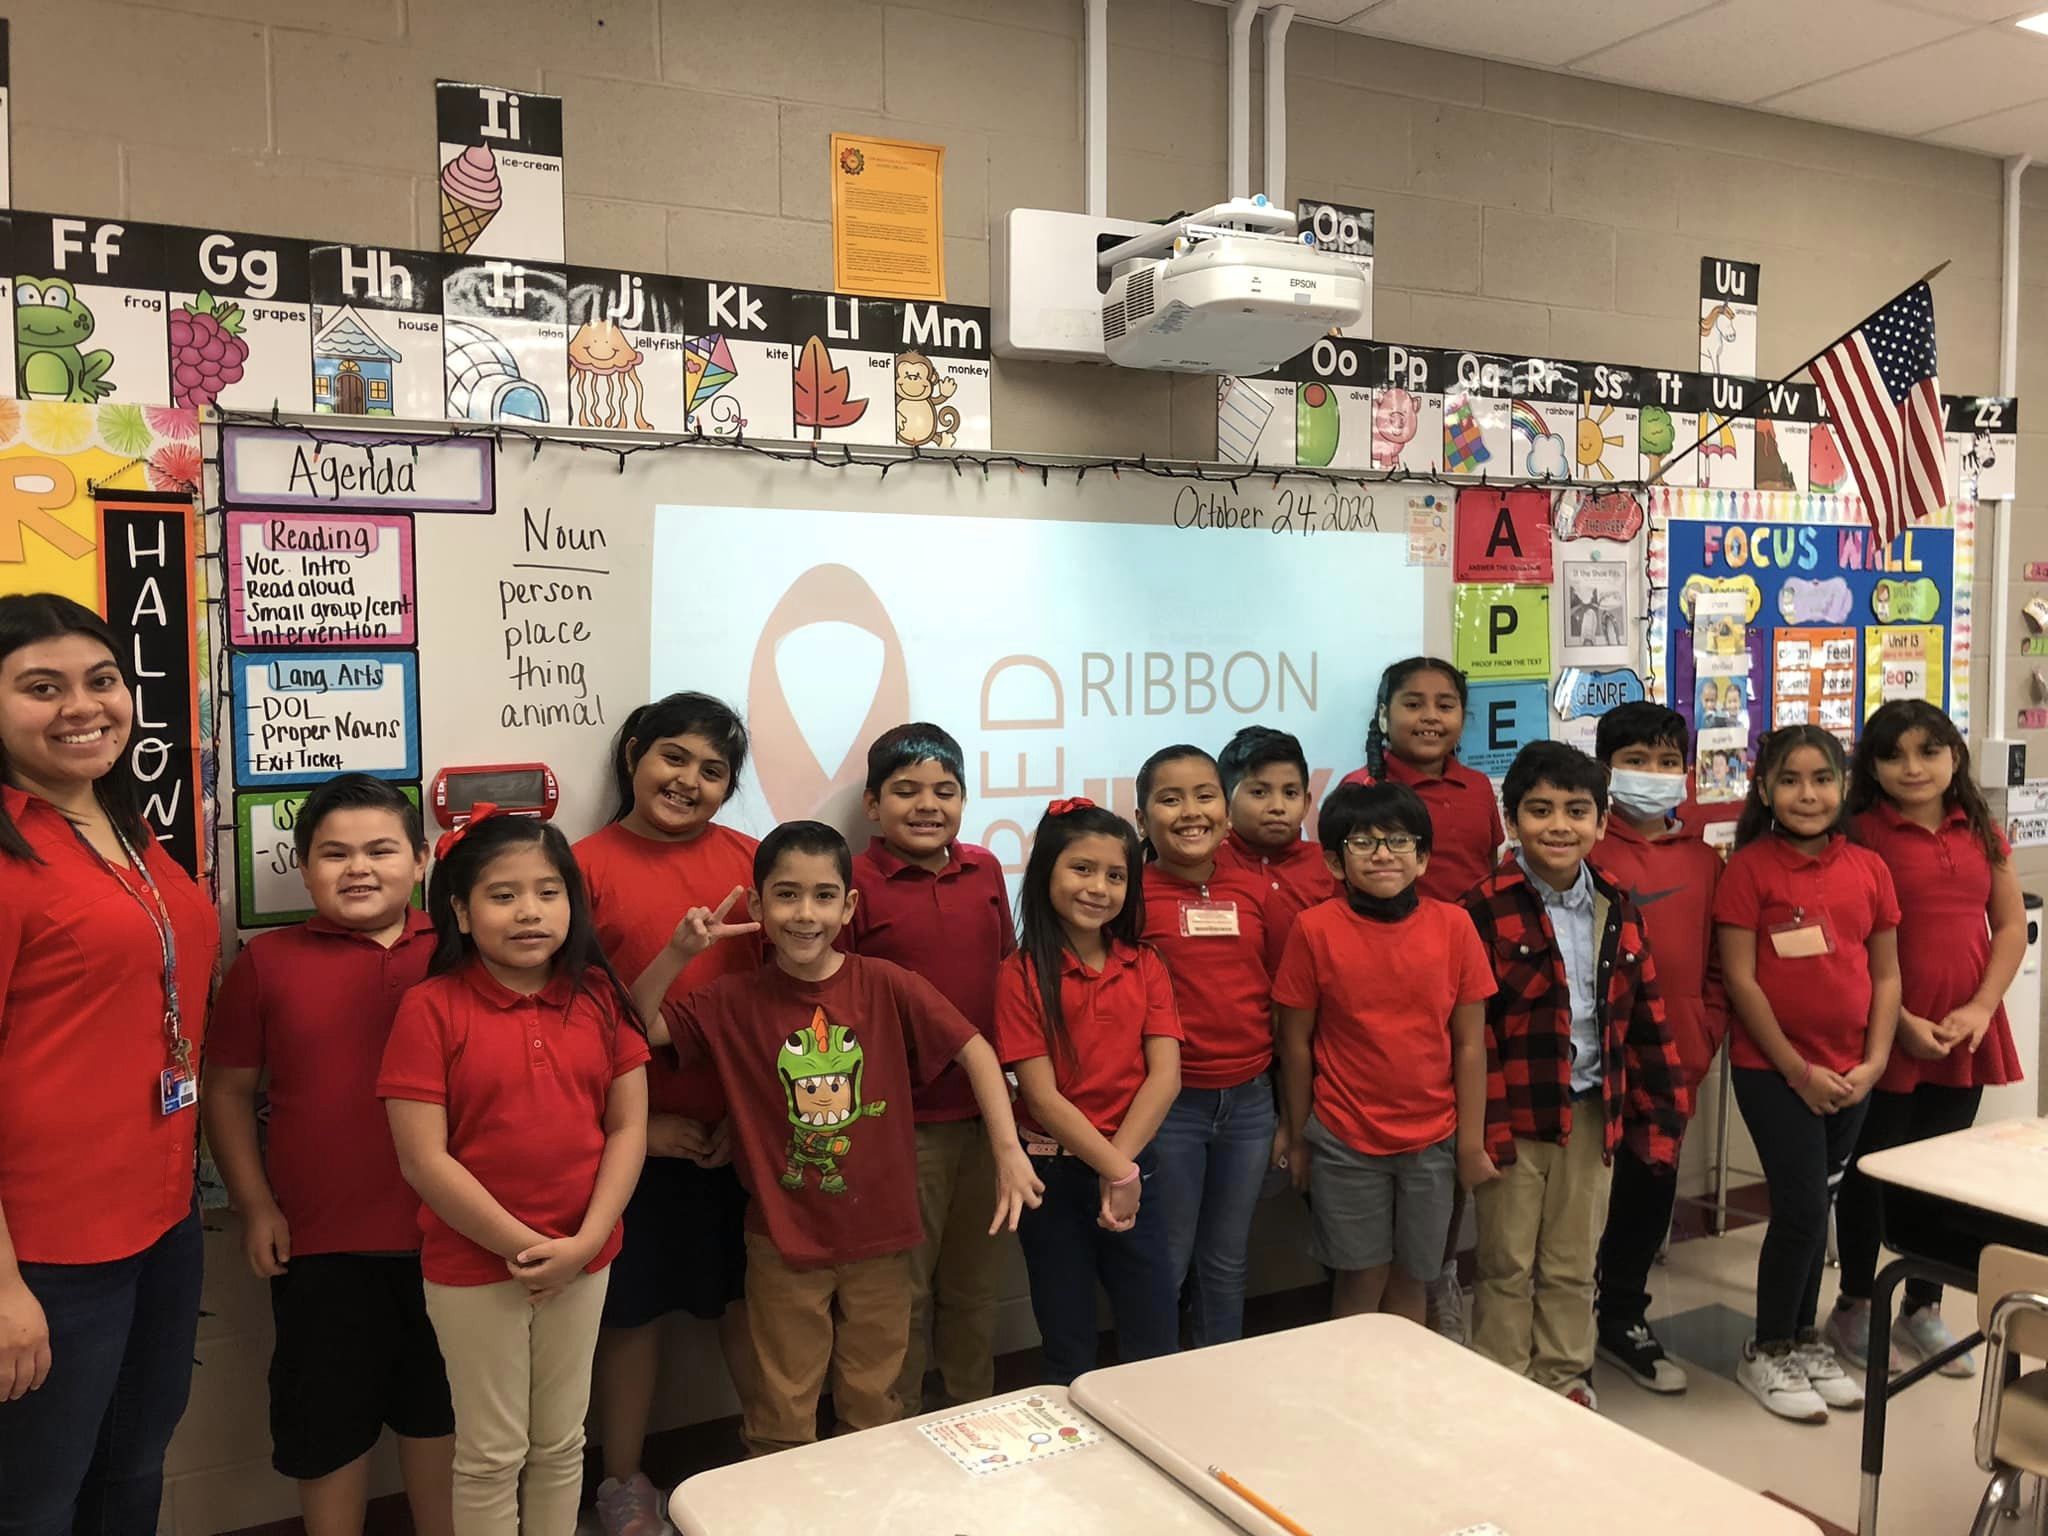 Ms. Frausto's class in red